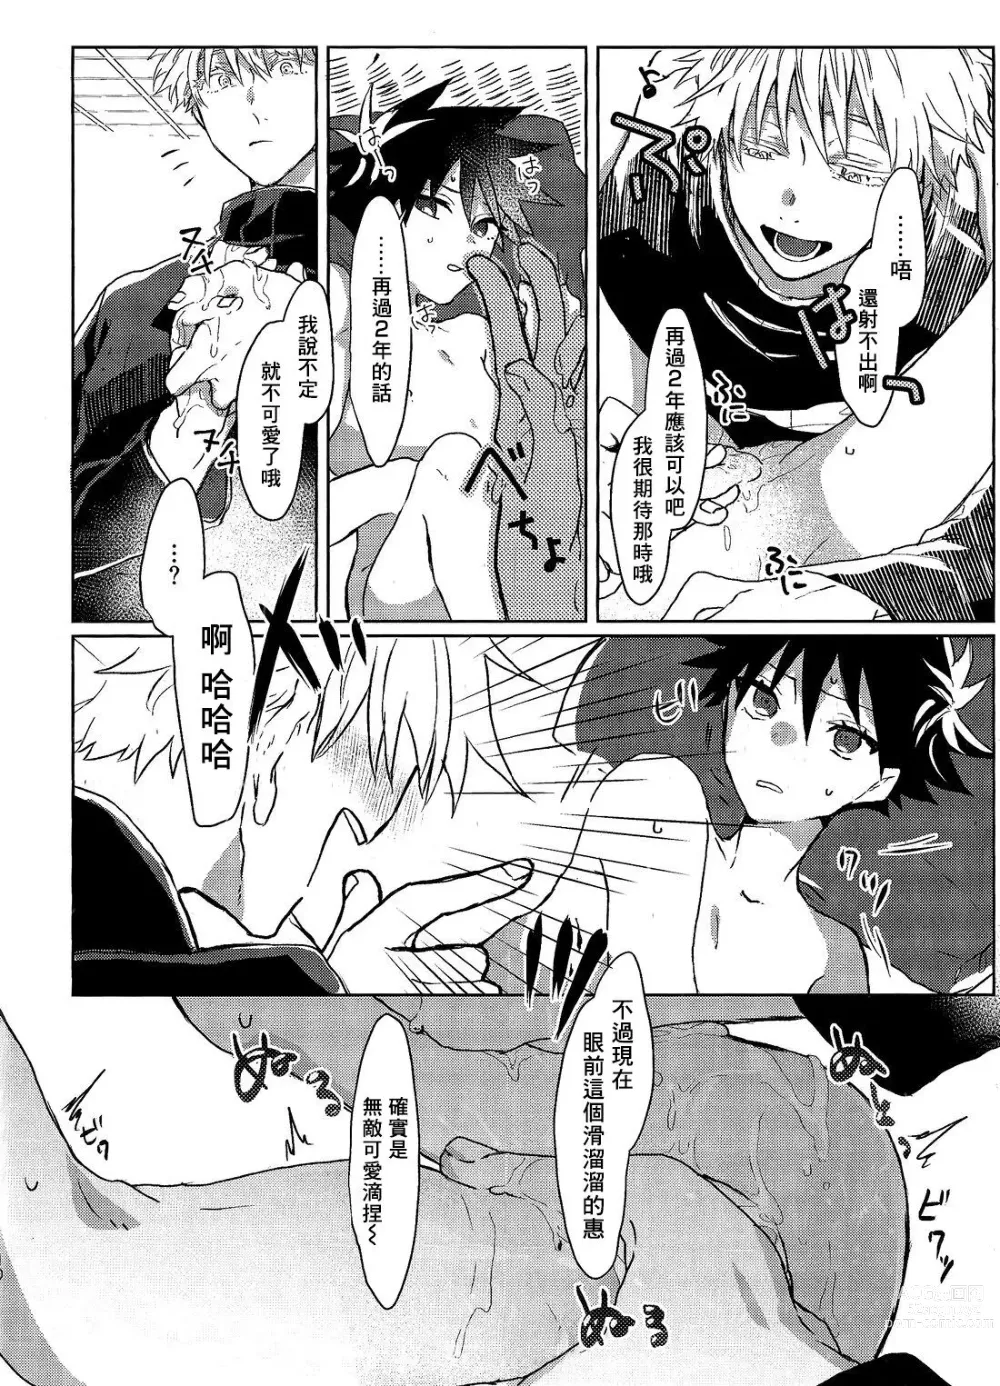 Page 10 of doujinshi Immoralist丨背德者